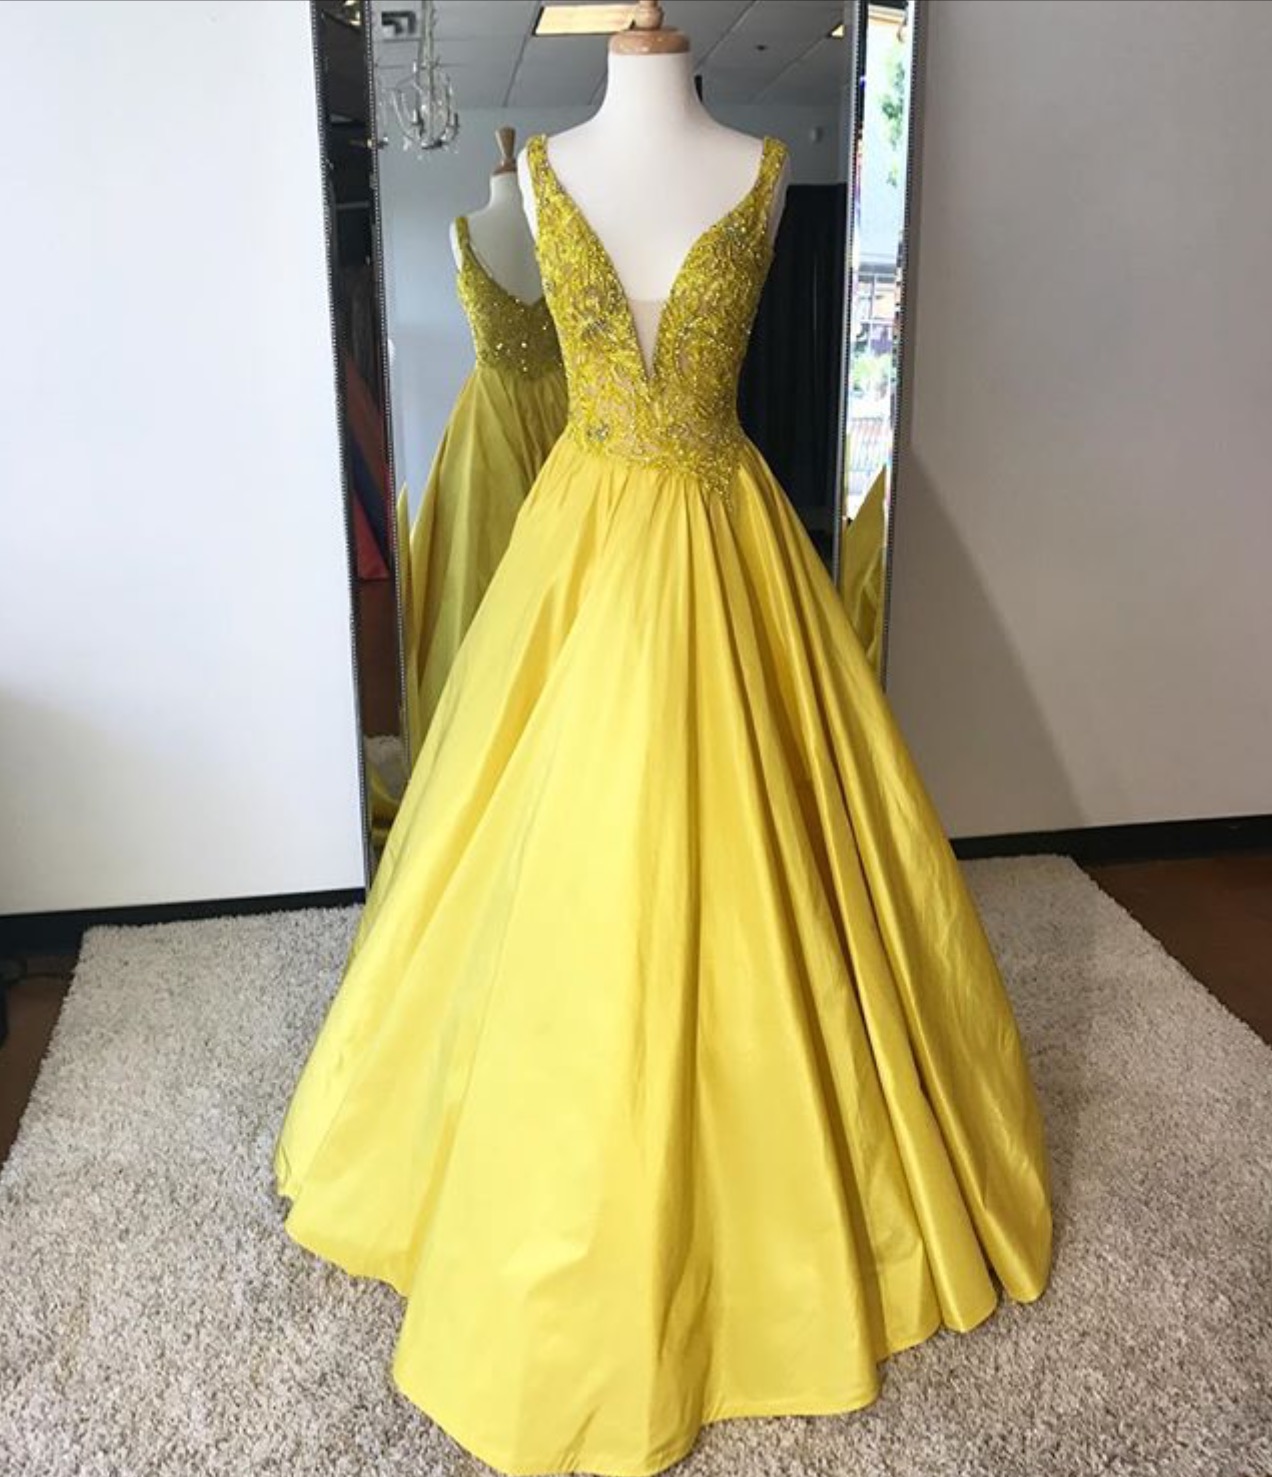 Glamorous A-line V-neck Sleeveless Yellow Long Prom/evening Dress With Appliques,pd14433